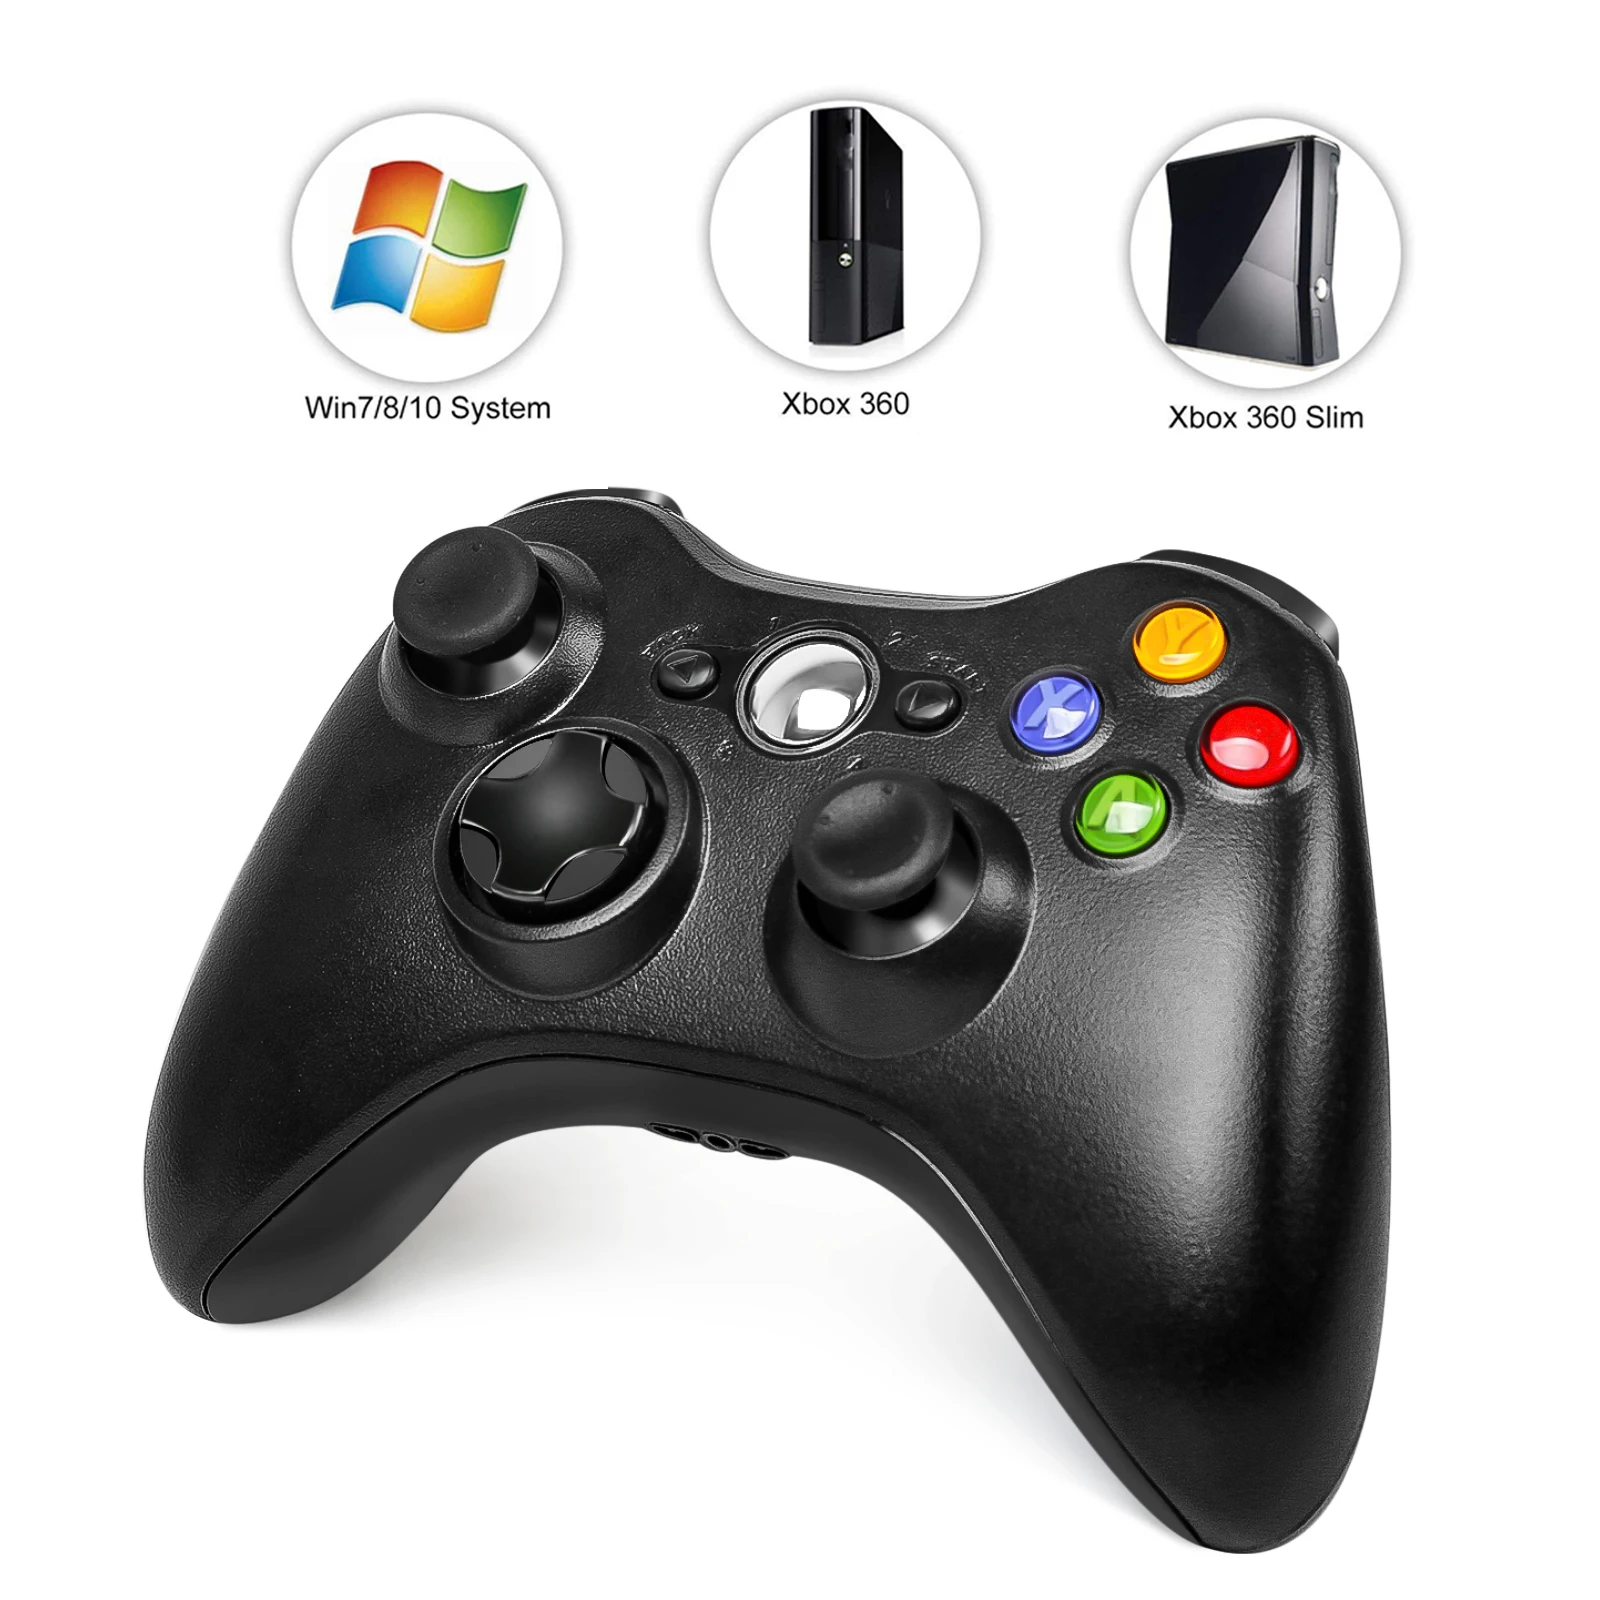 2.4G wireless Vibration Gamepad Joystick For PC Controller Compatible with Windows 7 8 10 Xbox series Joypad with high quality